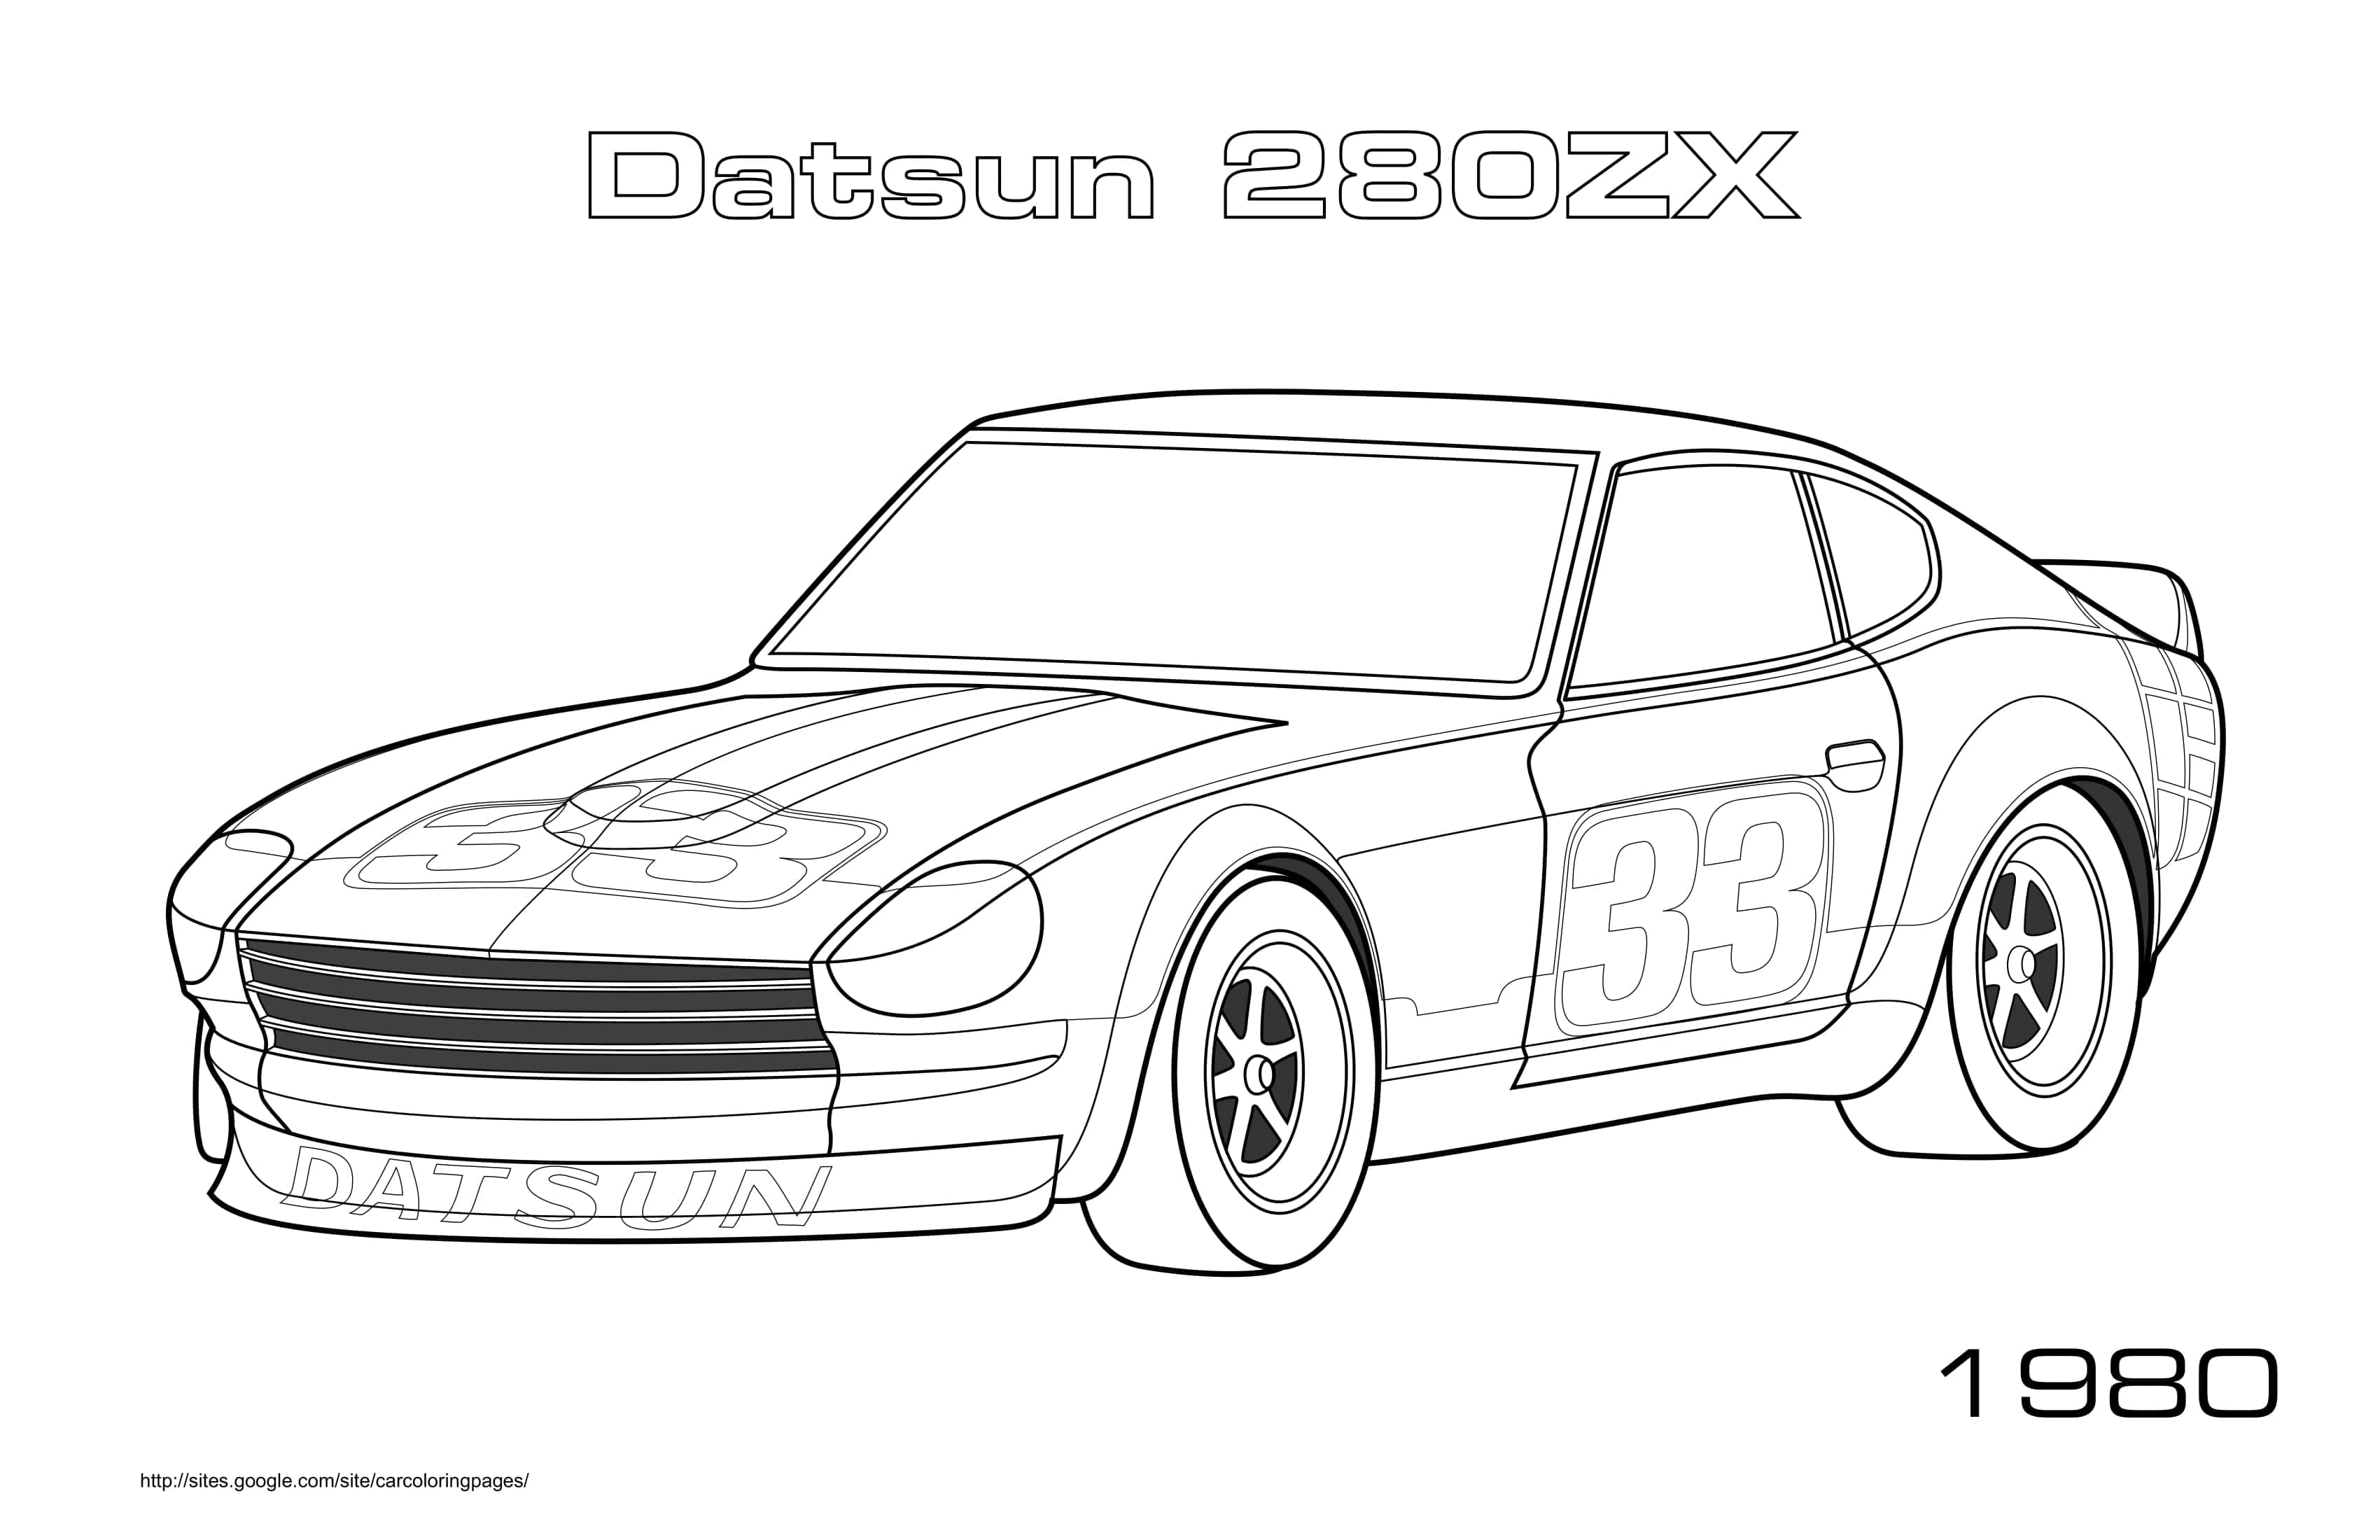 Datsun 280zx 1980 Coloring Page